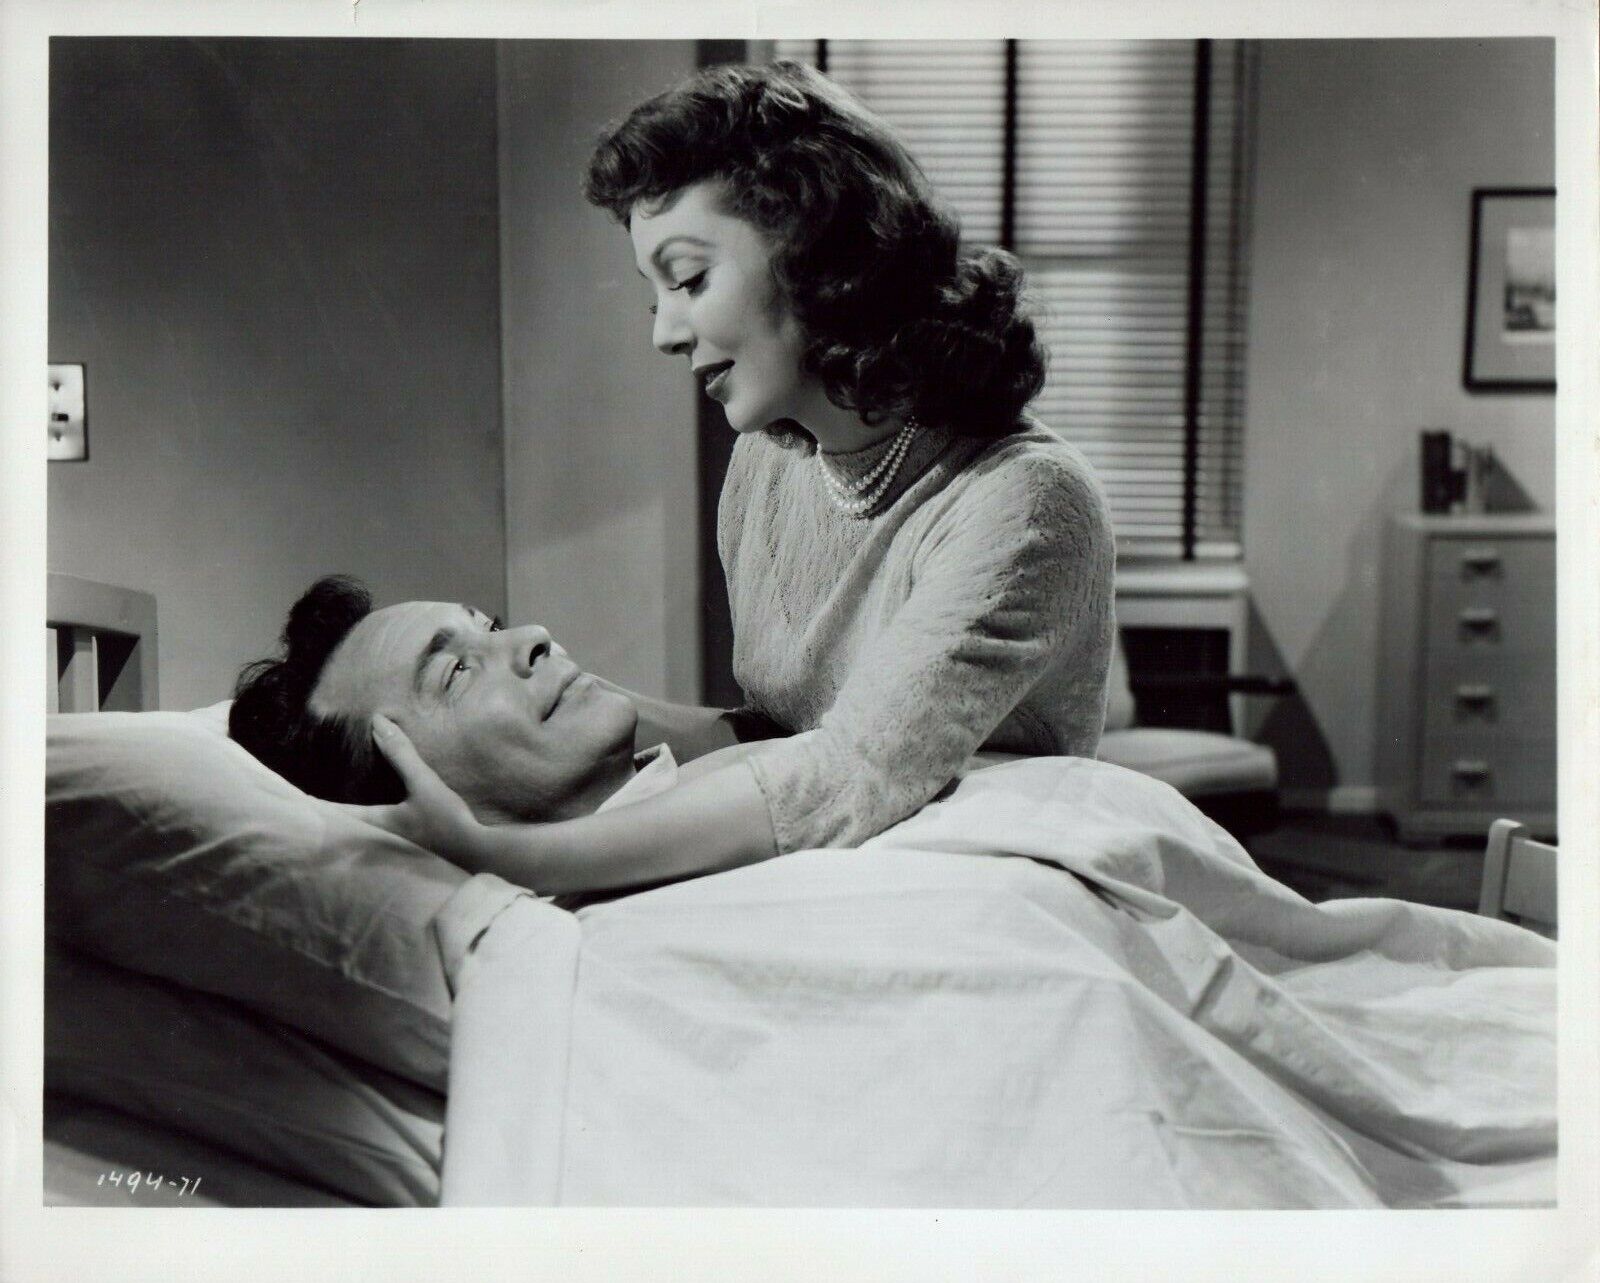 ALAN LADD LORETTA YOUNG 1944 Vintage Movie 8x10 Promo Photo Poster painting AND NOW TOMORROW